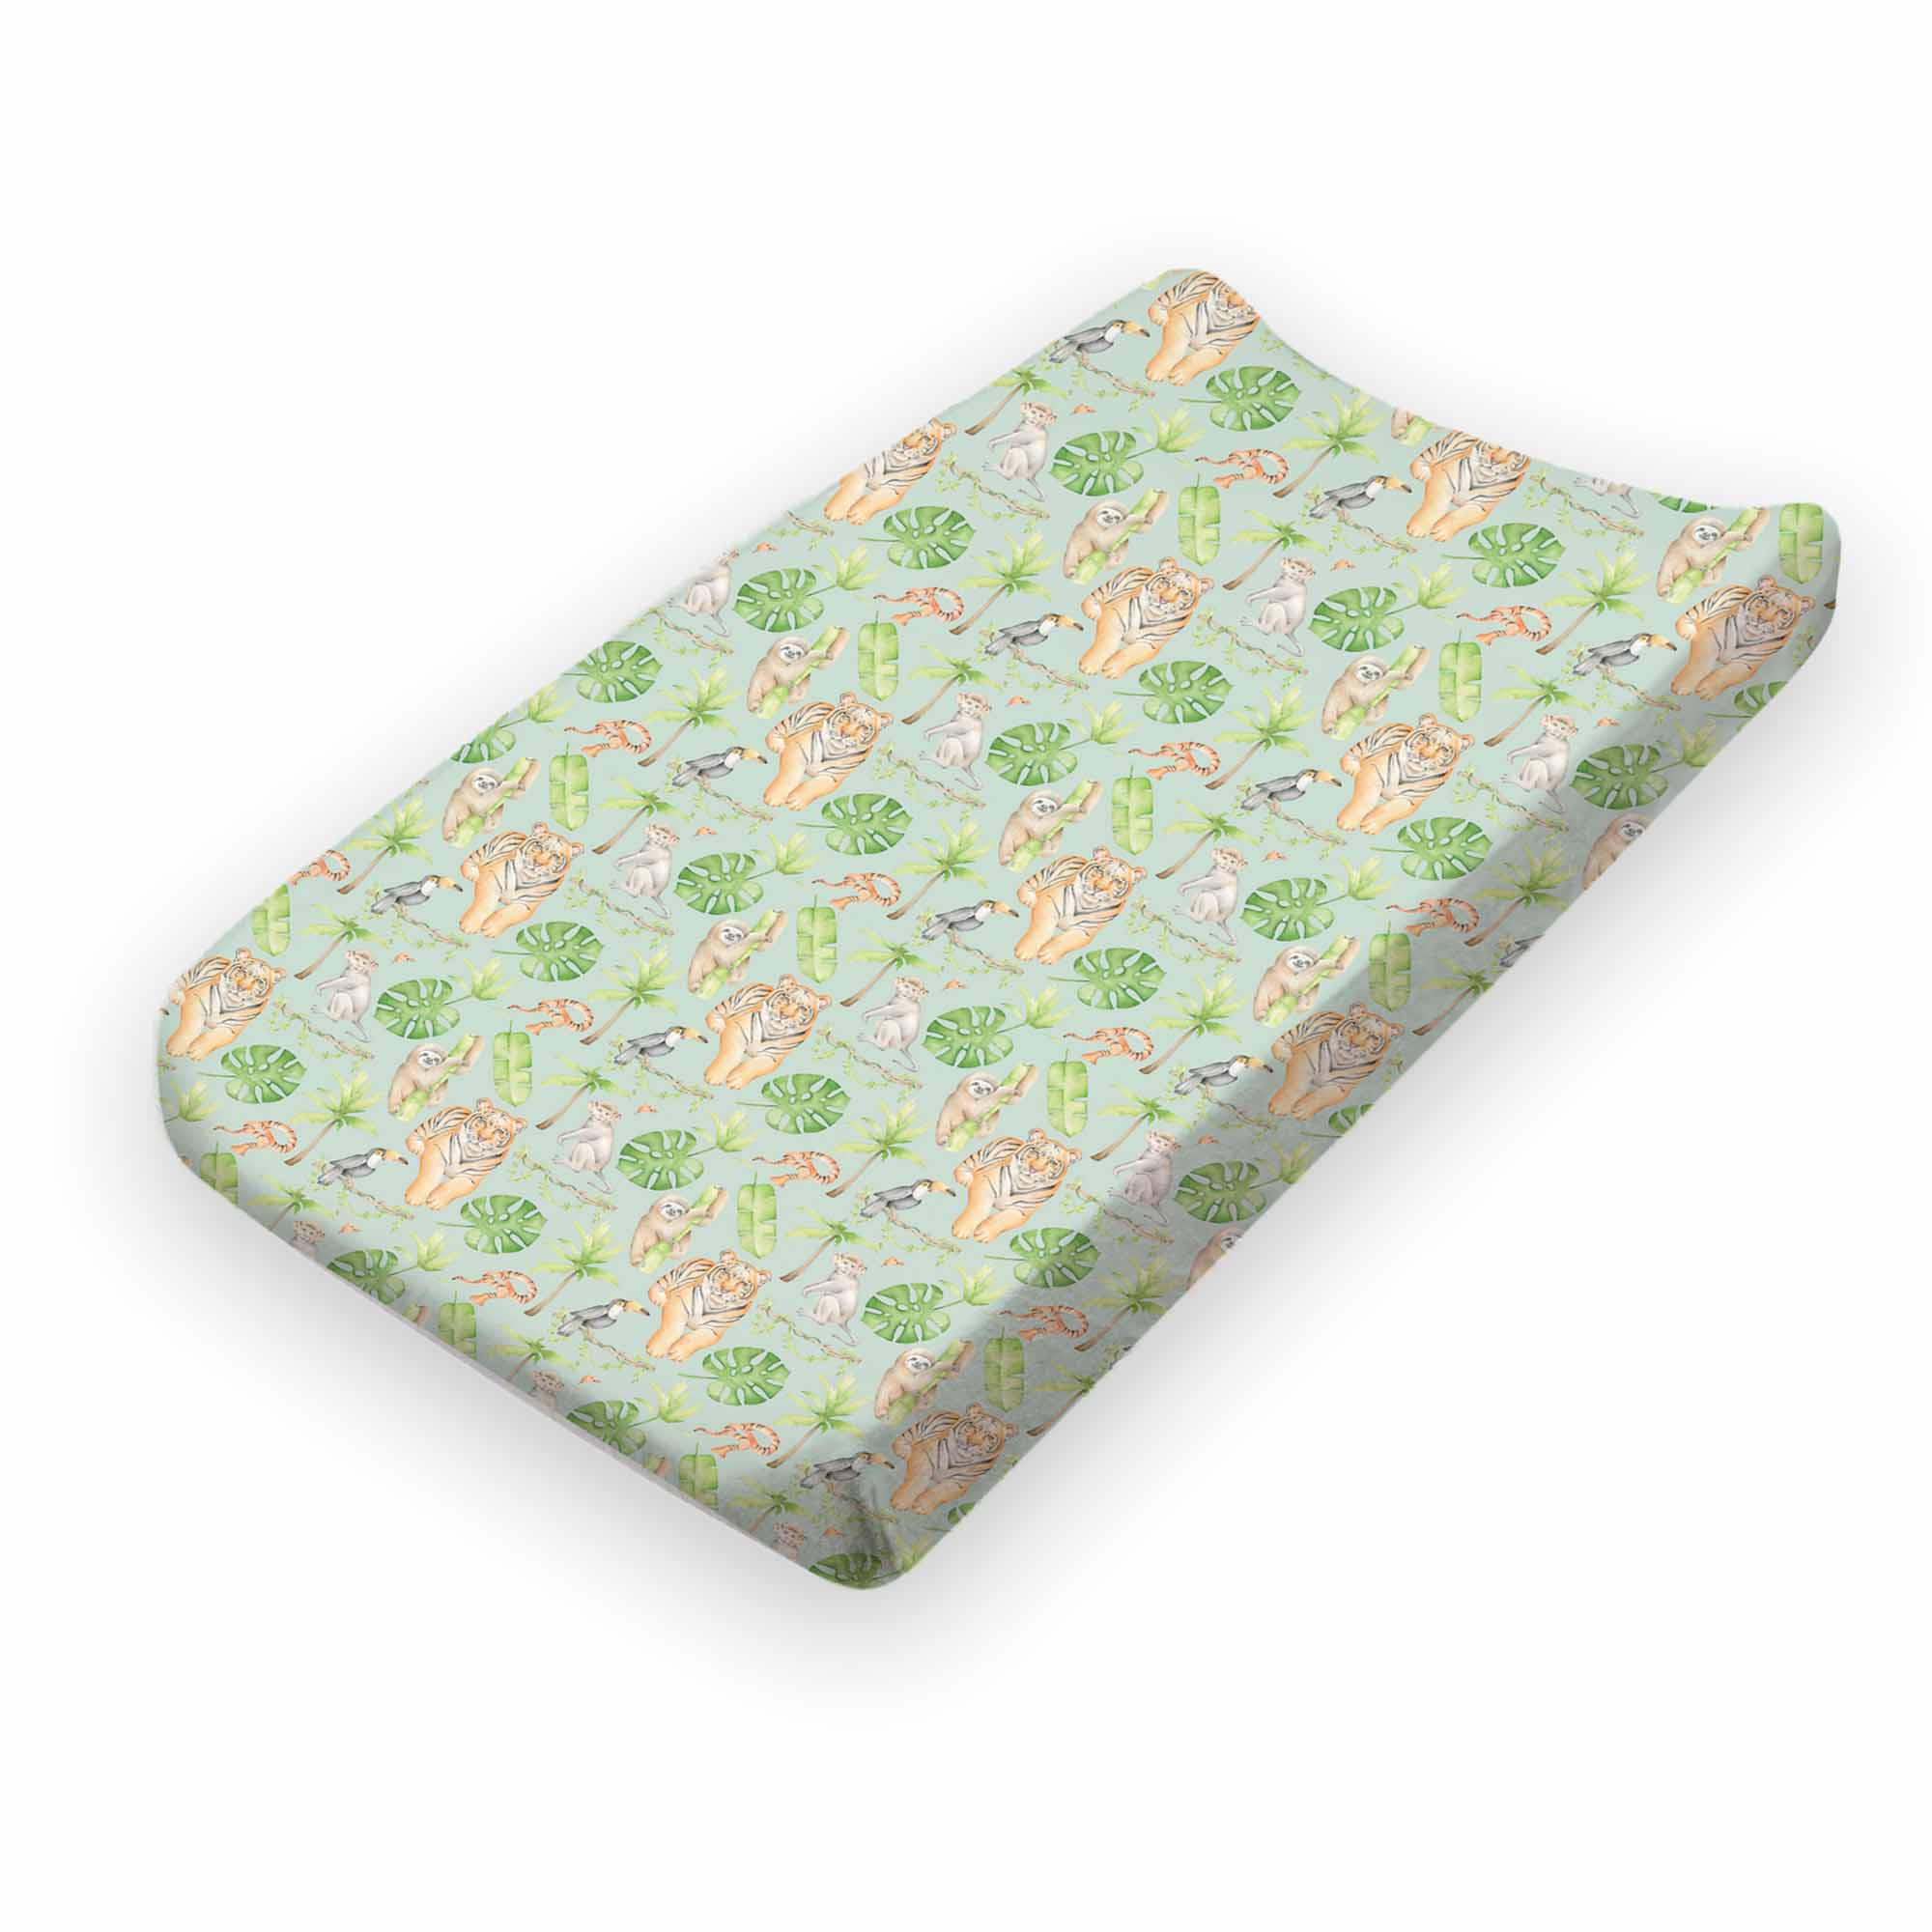 Brooklyn Changing Pad Cover: FINAL SALE